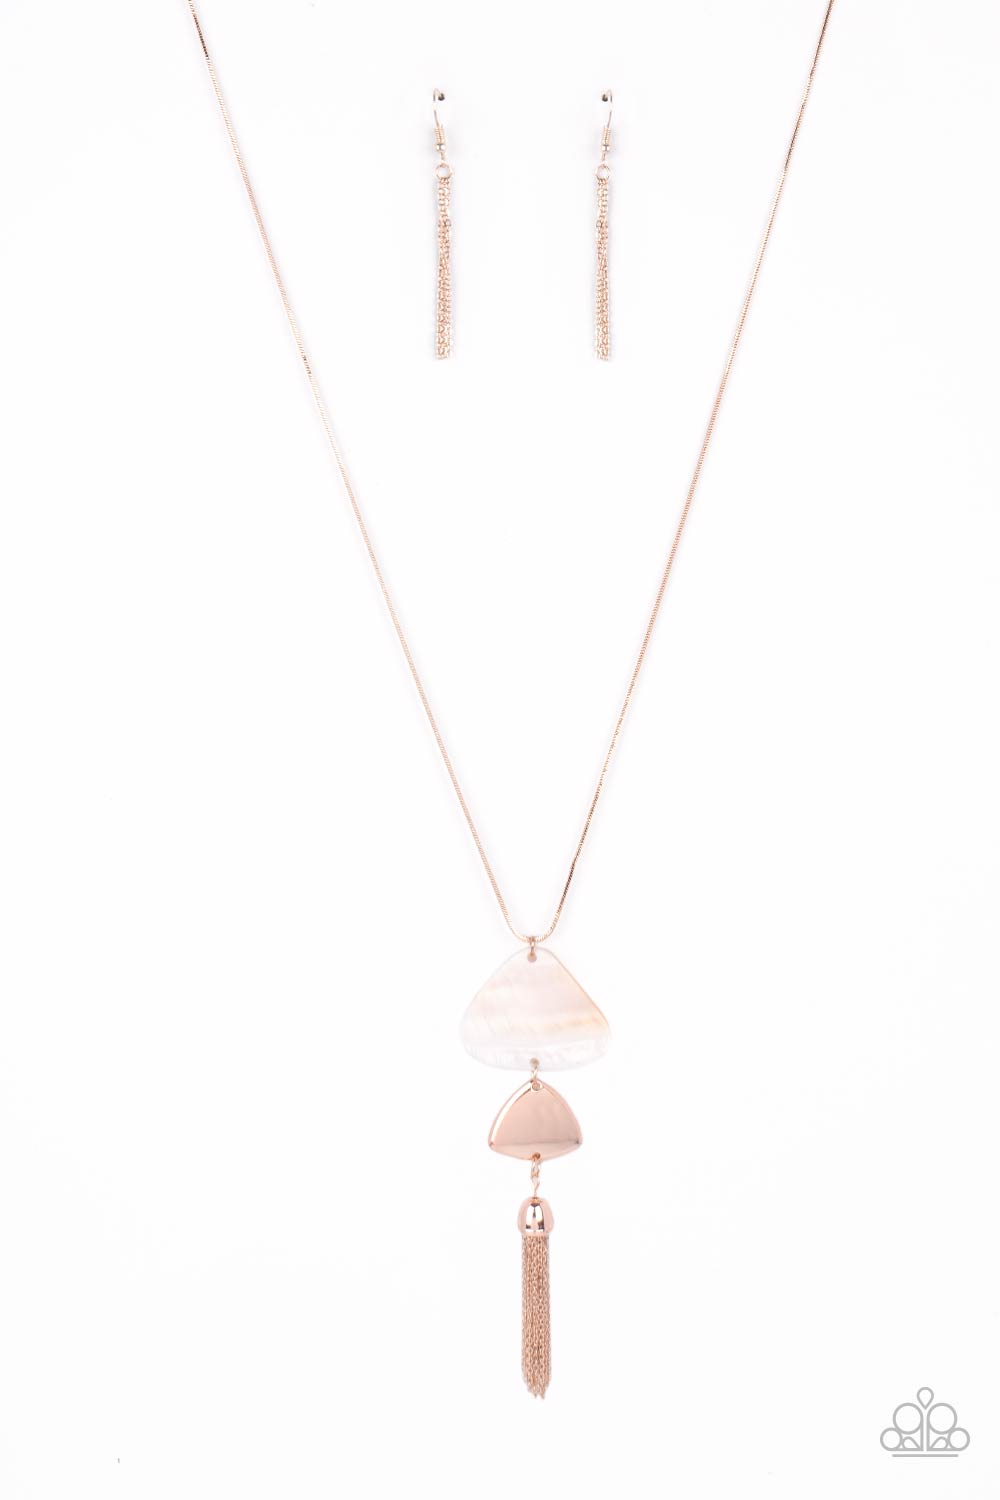 TIDE You Over Rose Gold Necklace - Paparazzi